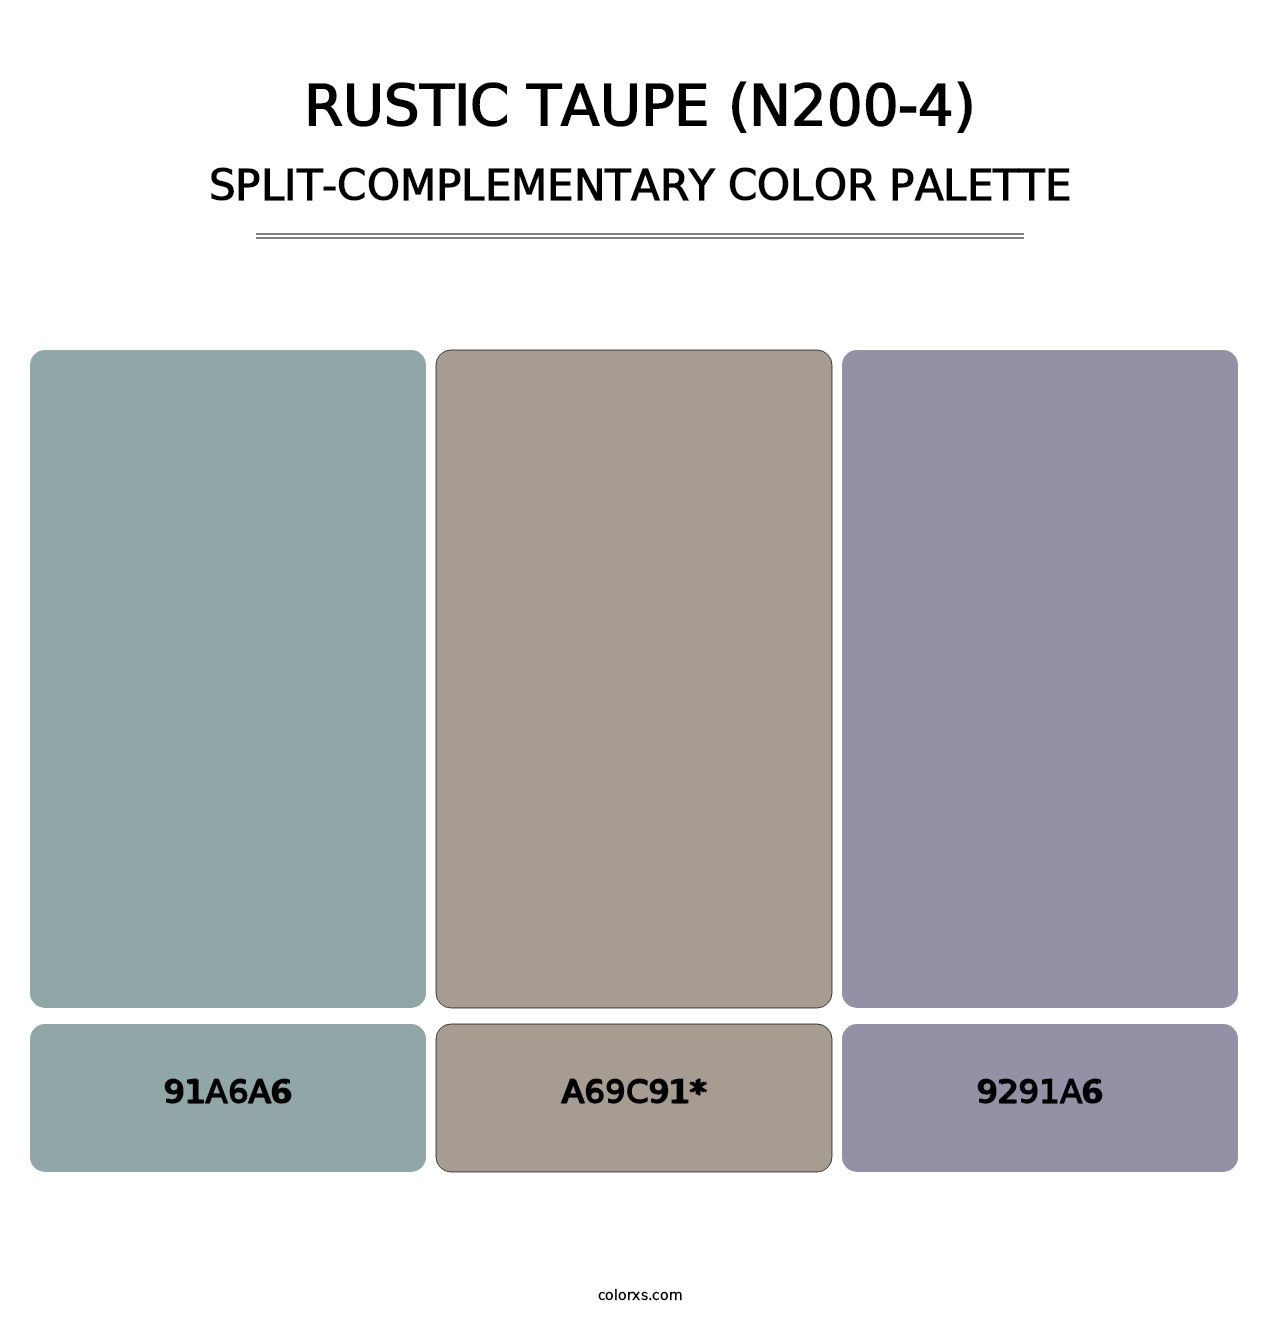 Rustic Taupe (N200-4) - Split-Complementary Color Palette